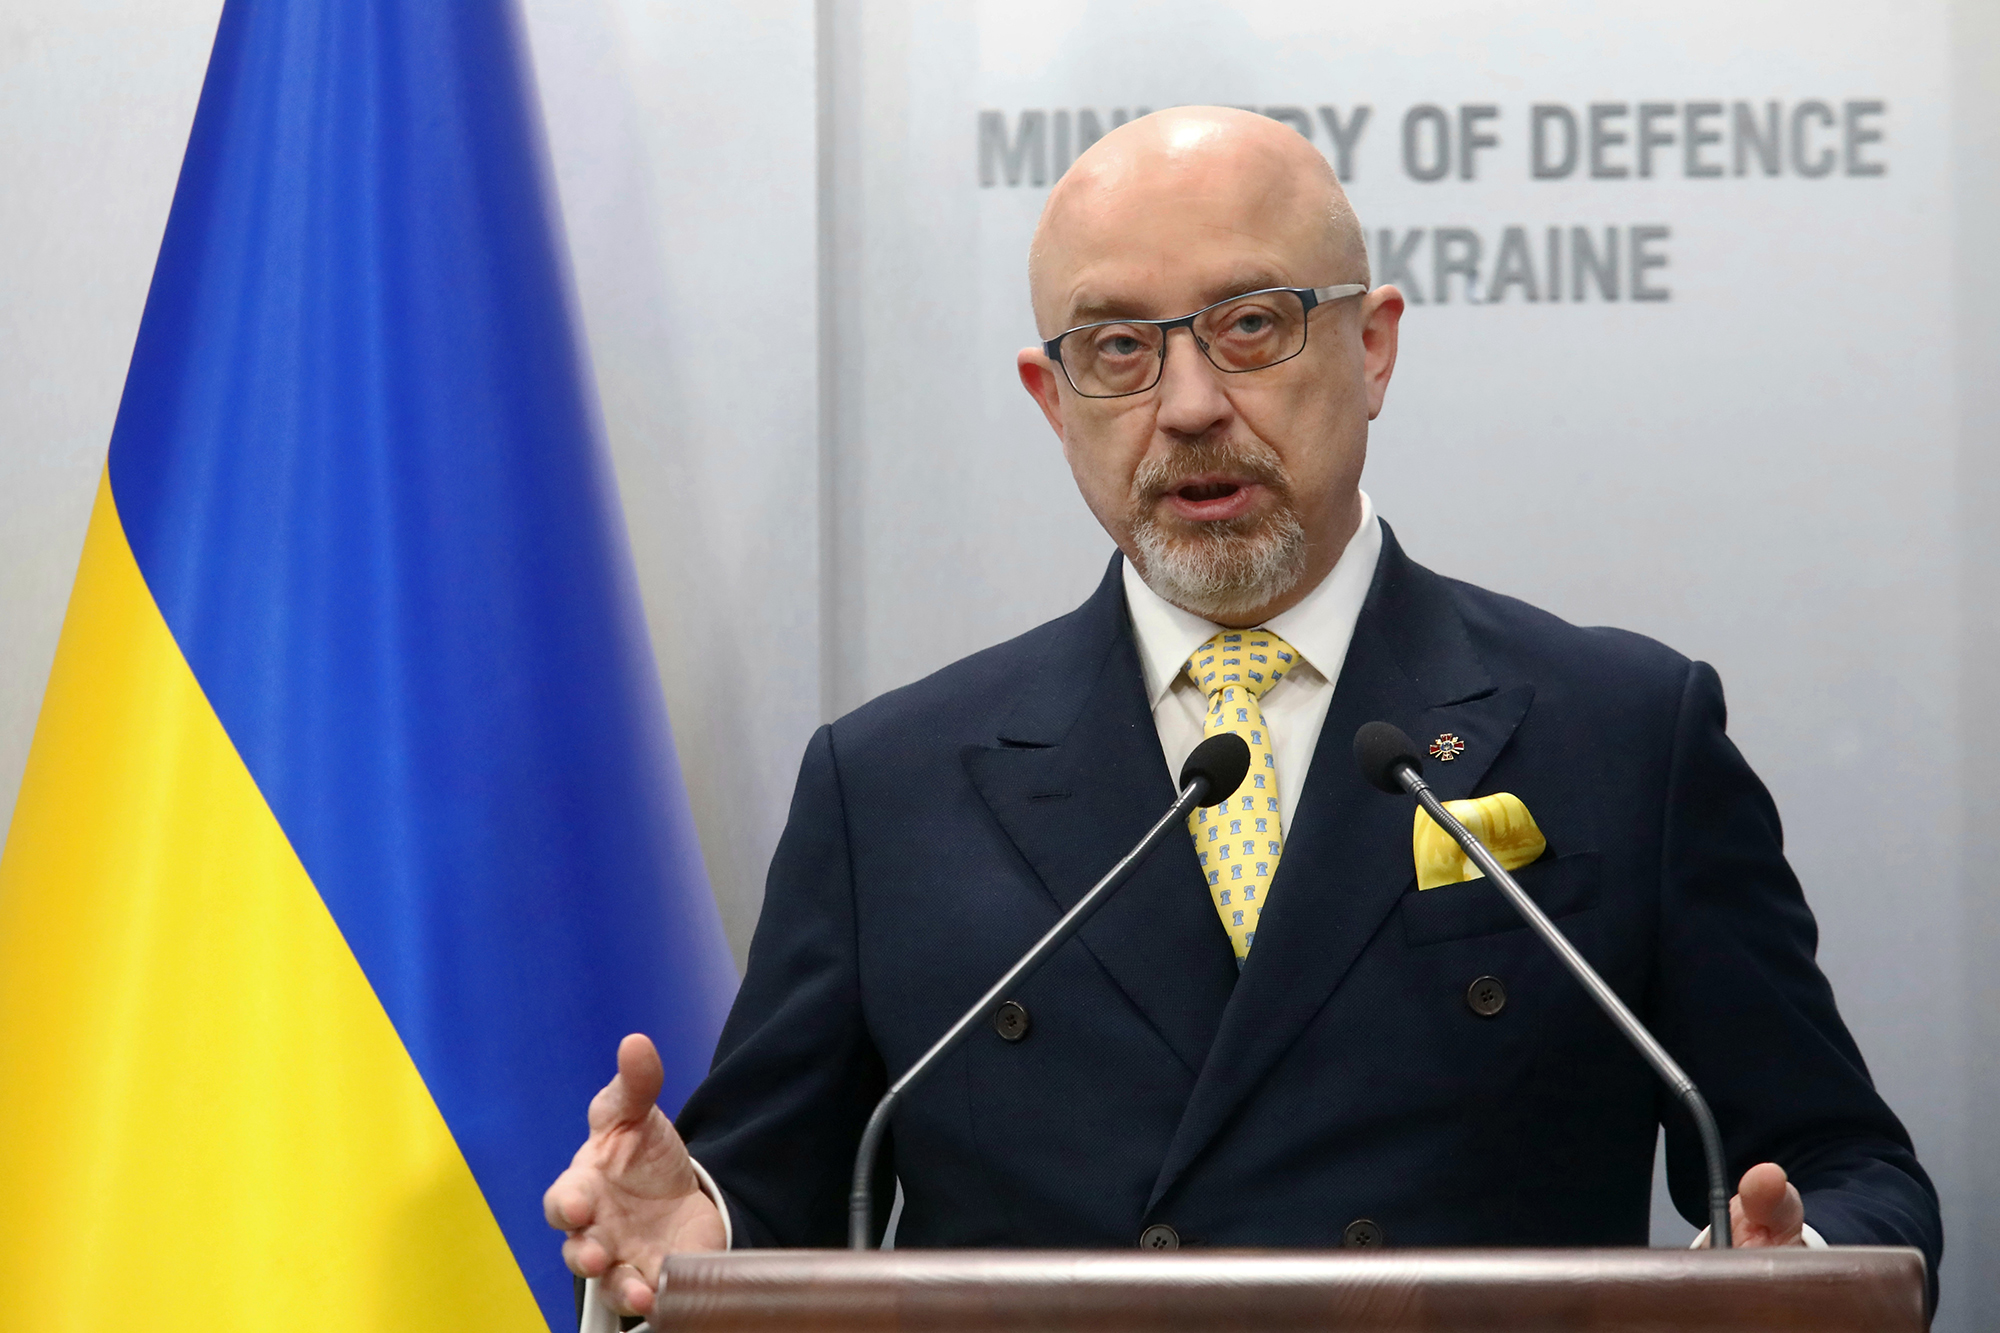 14) Ukraine's defense minister says forces are "ready to fight back," won't allow capture of any Ukrainian cities